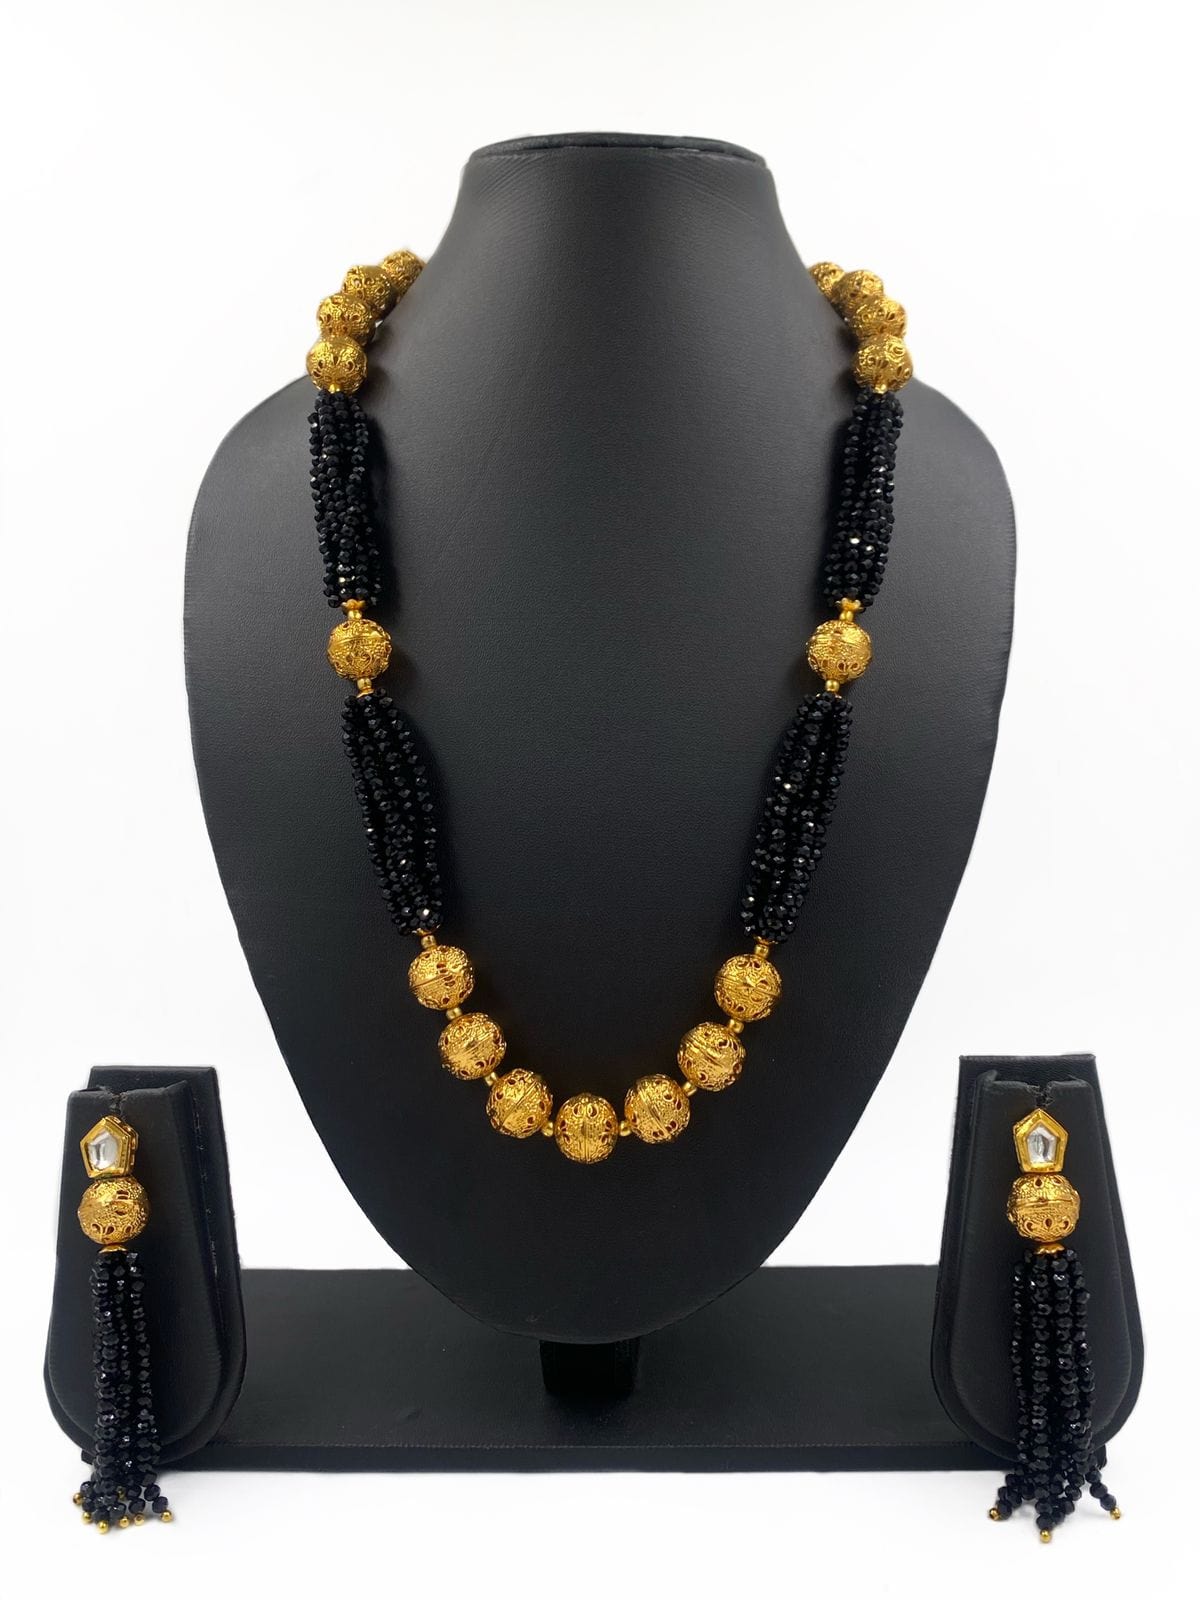 Designer Handcrafted Black Crystal And Golden Beads Necklace For Woman By Gehna Shop Beads Jewellery